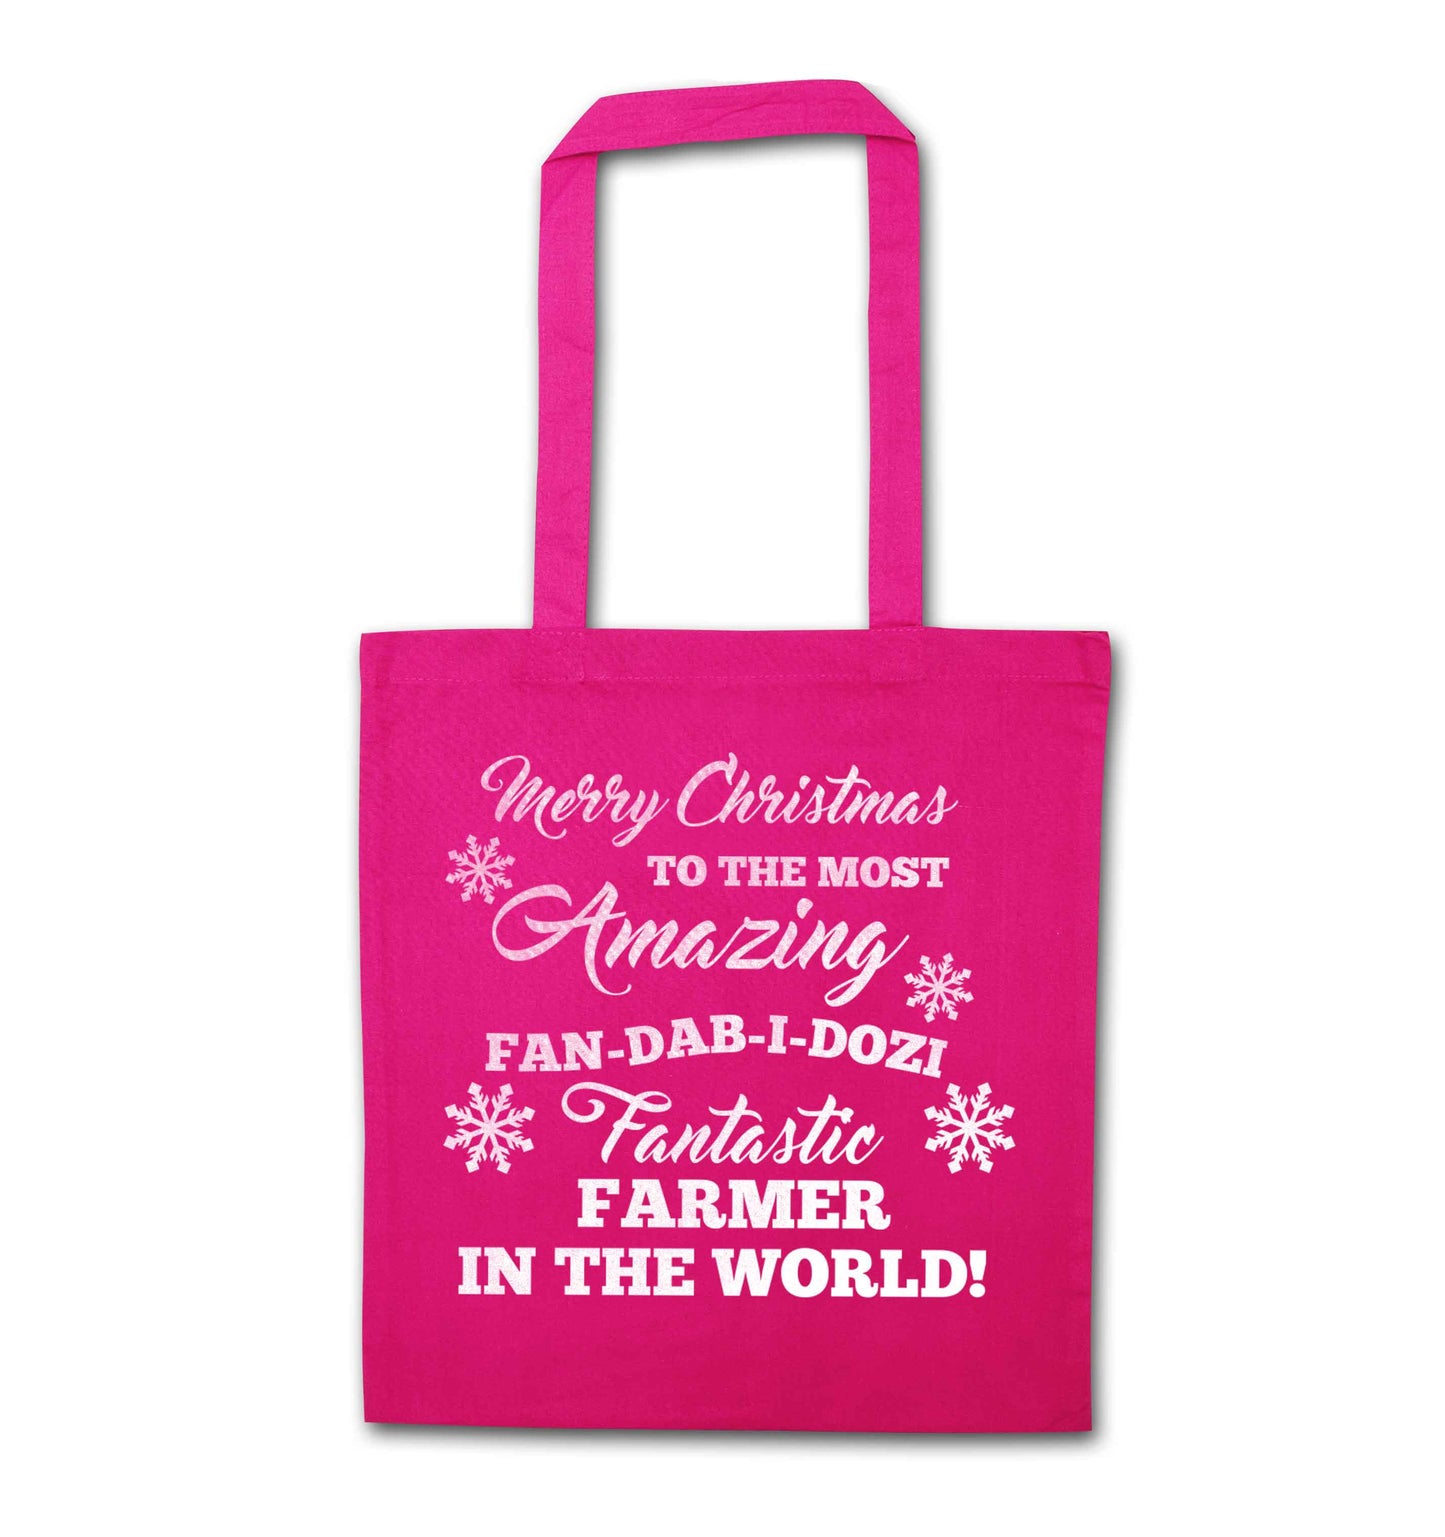 Merry Christmas to the most amazing farmer in the world! pink tote bag